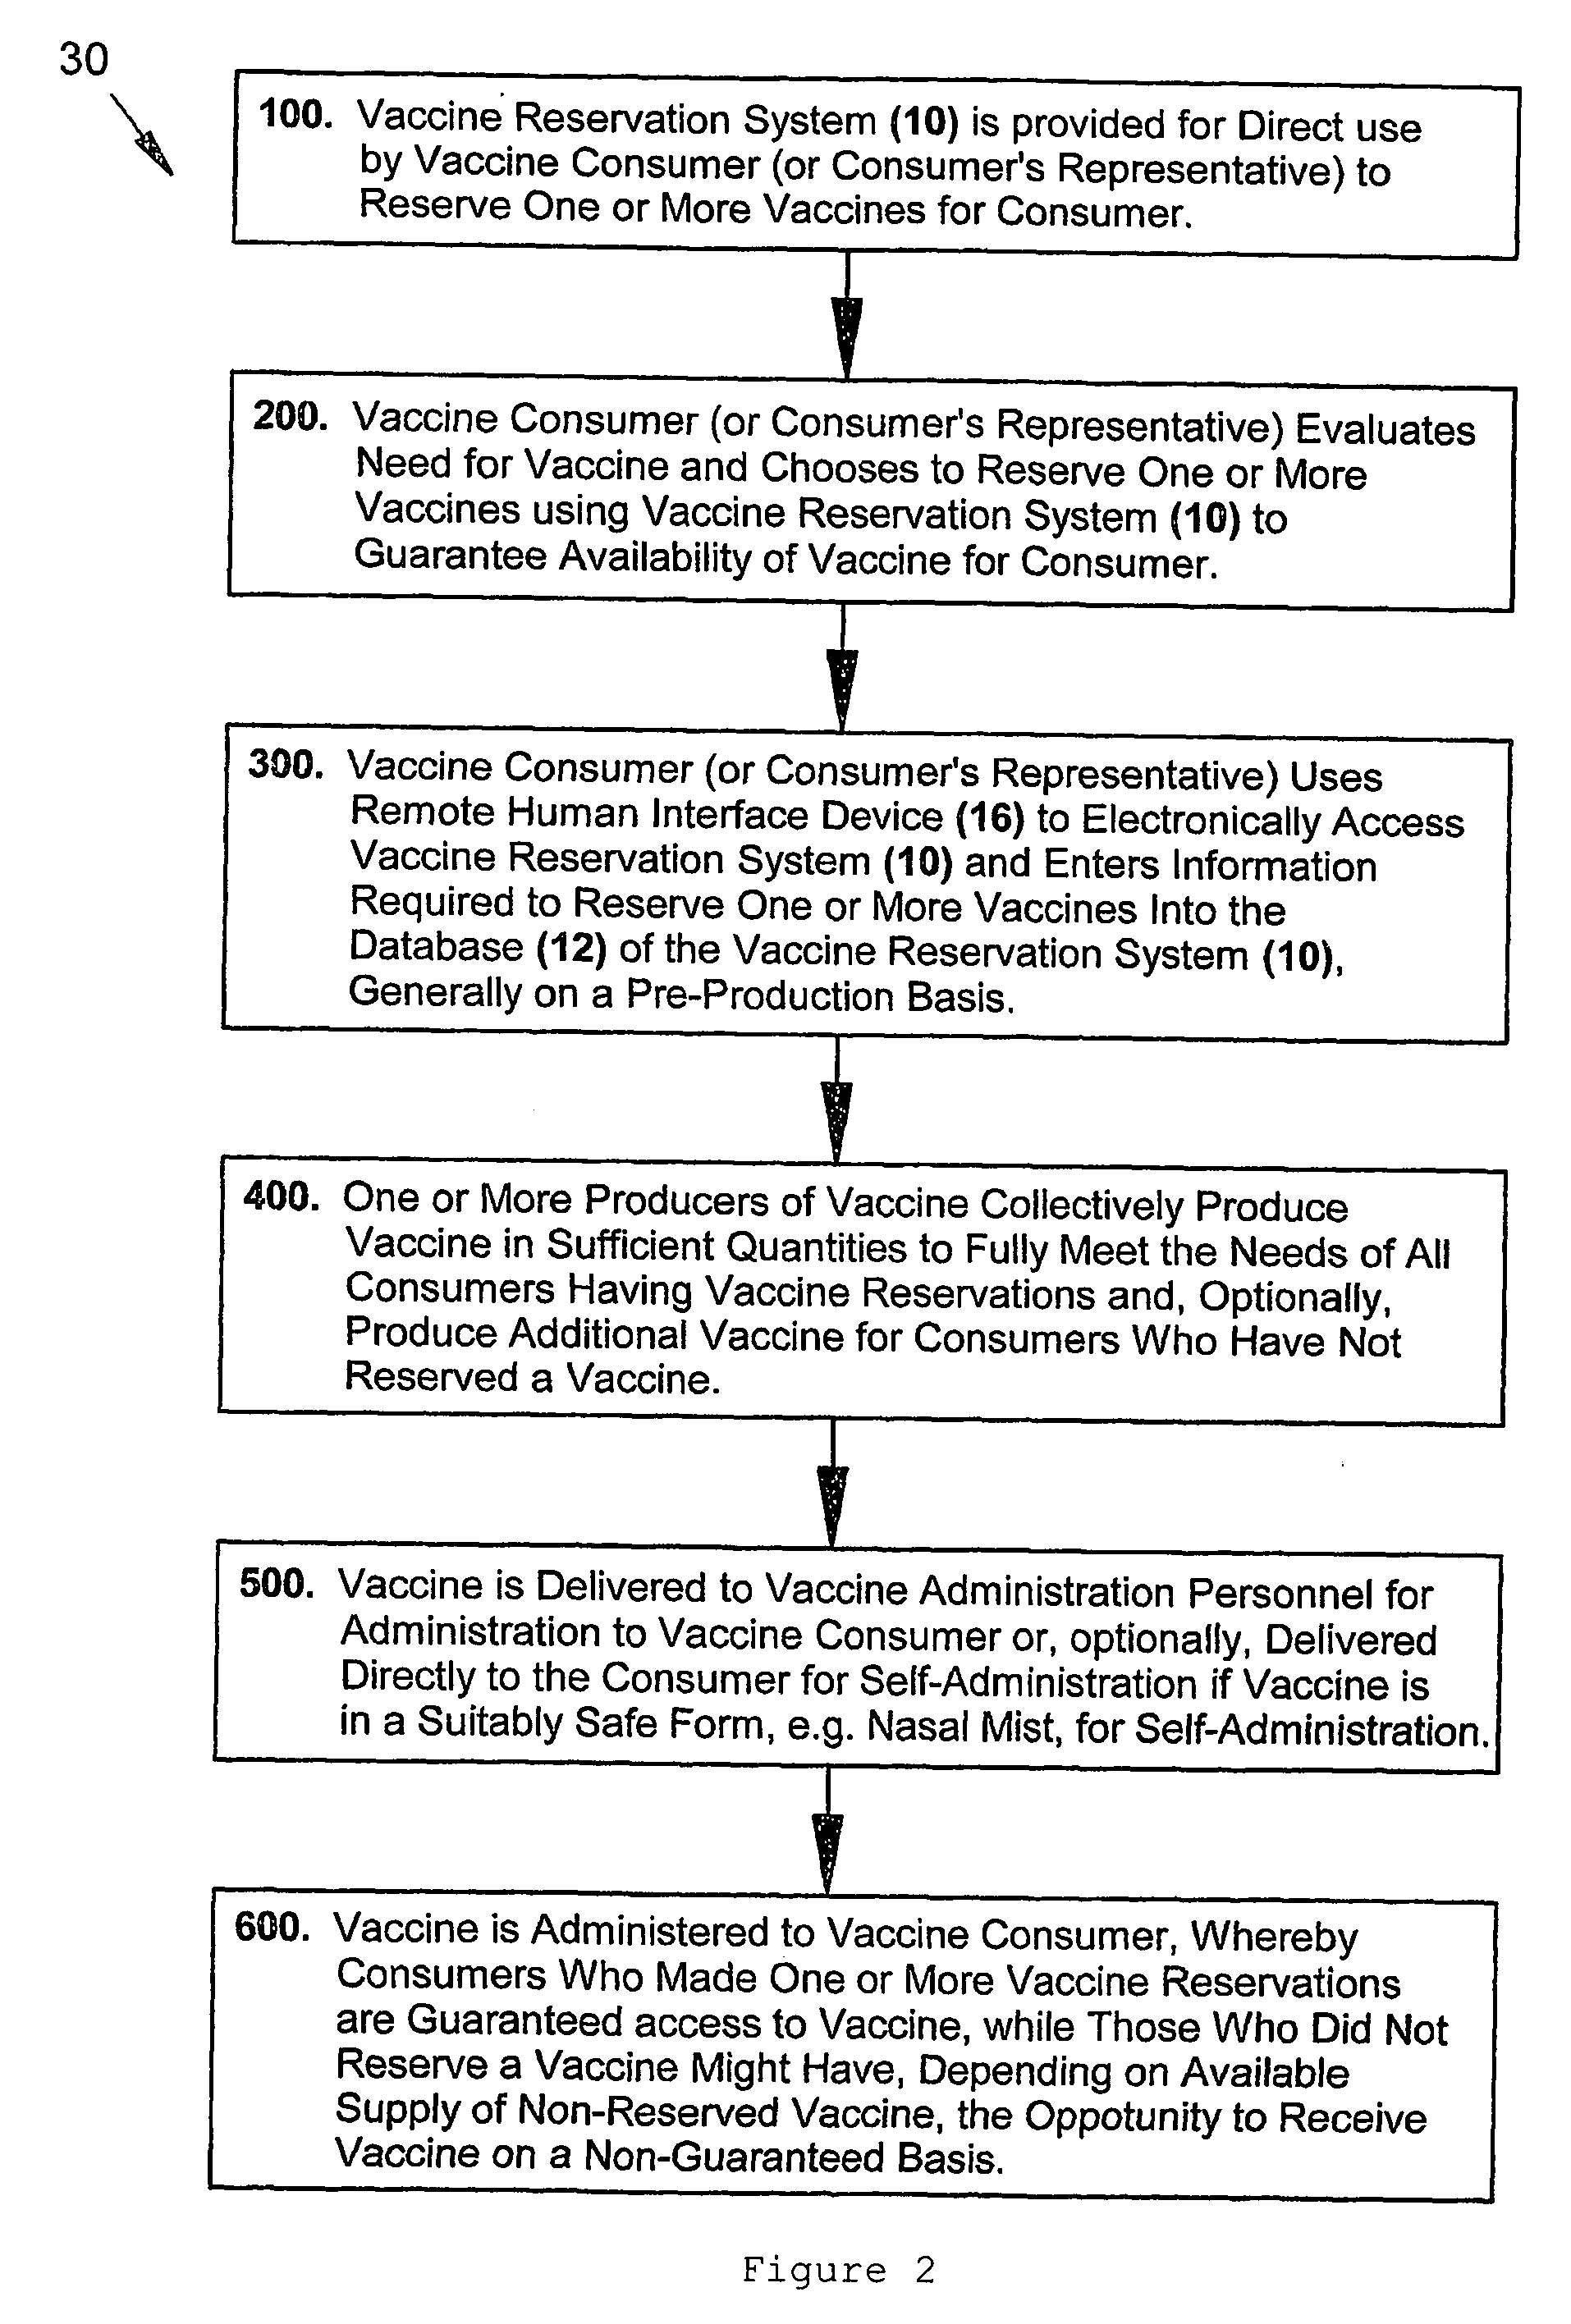 Consumer-driven pre-production vaccine reservation system and methods of using a vaccine reservation system